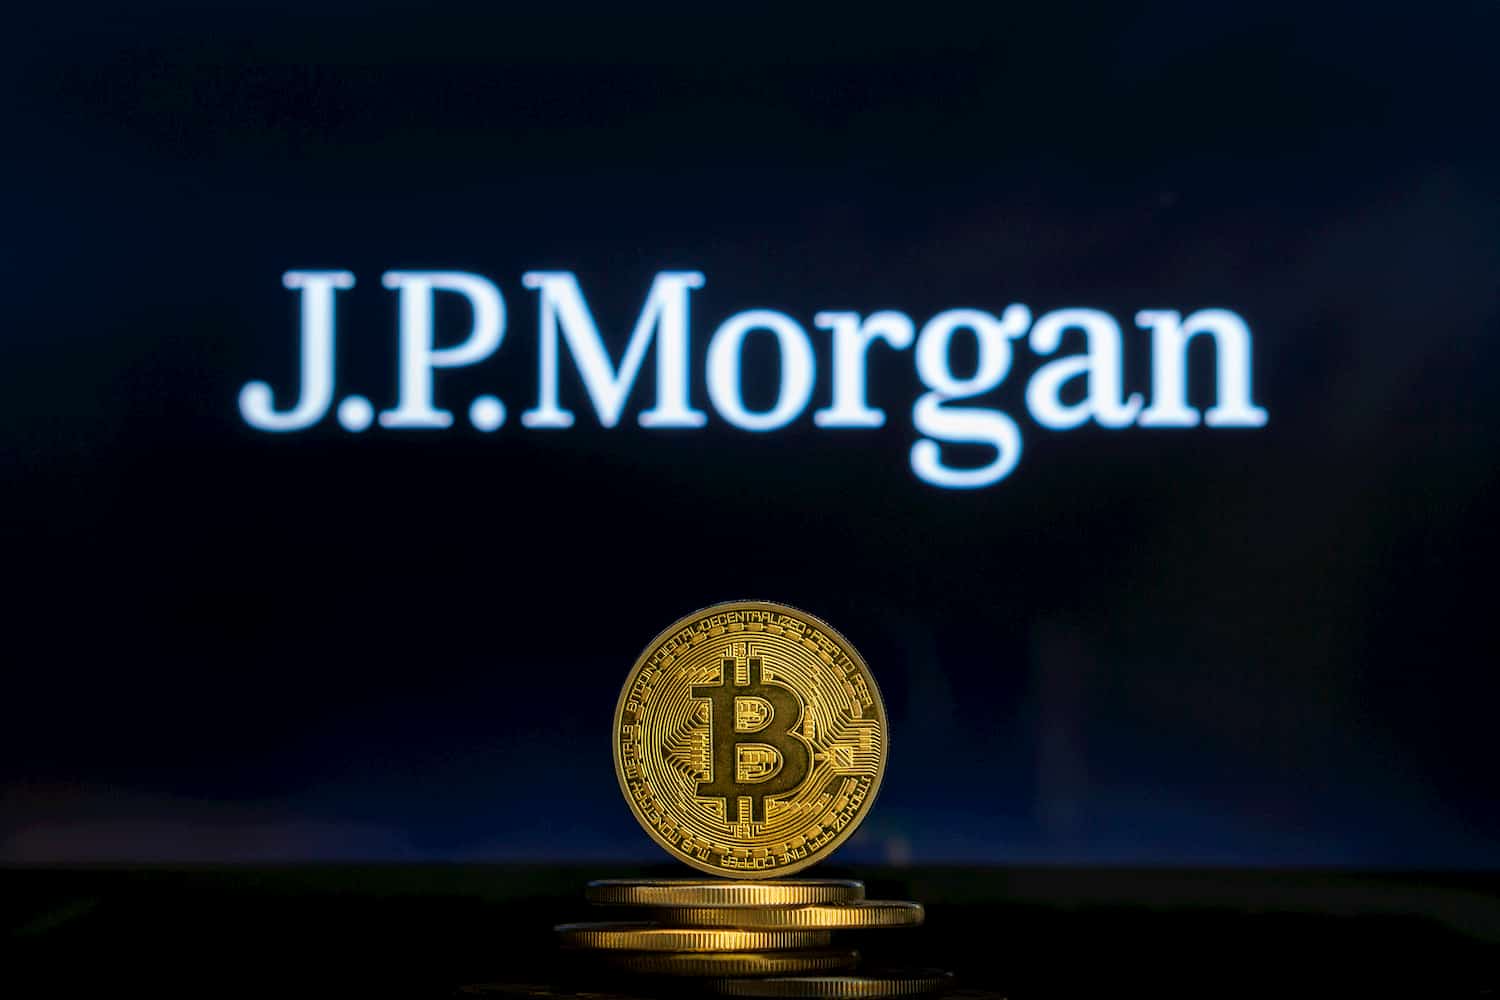 Bitcoin price could rise to $146,000 according to JPMorgan Chase bank